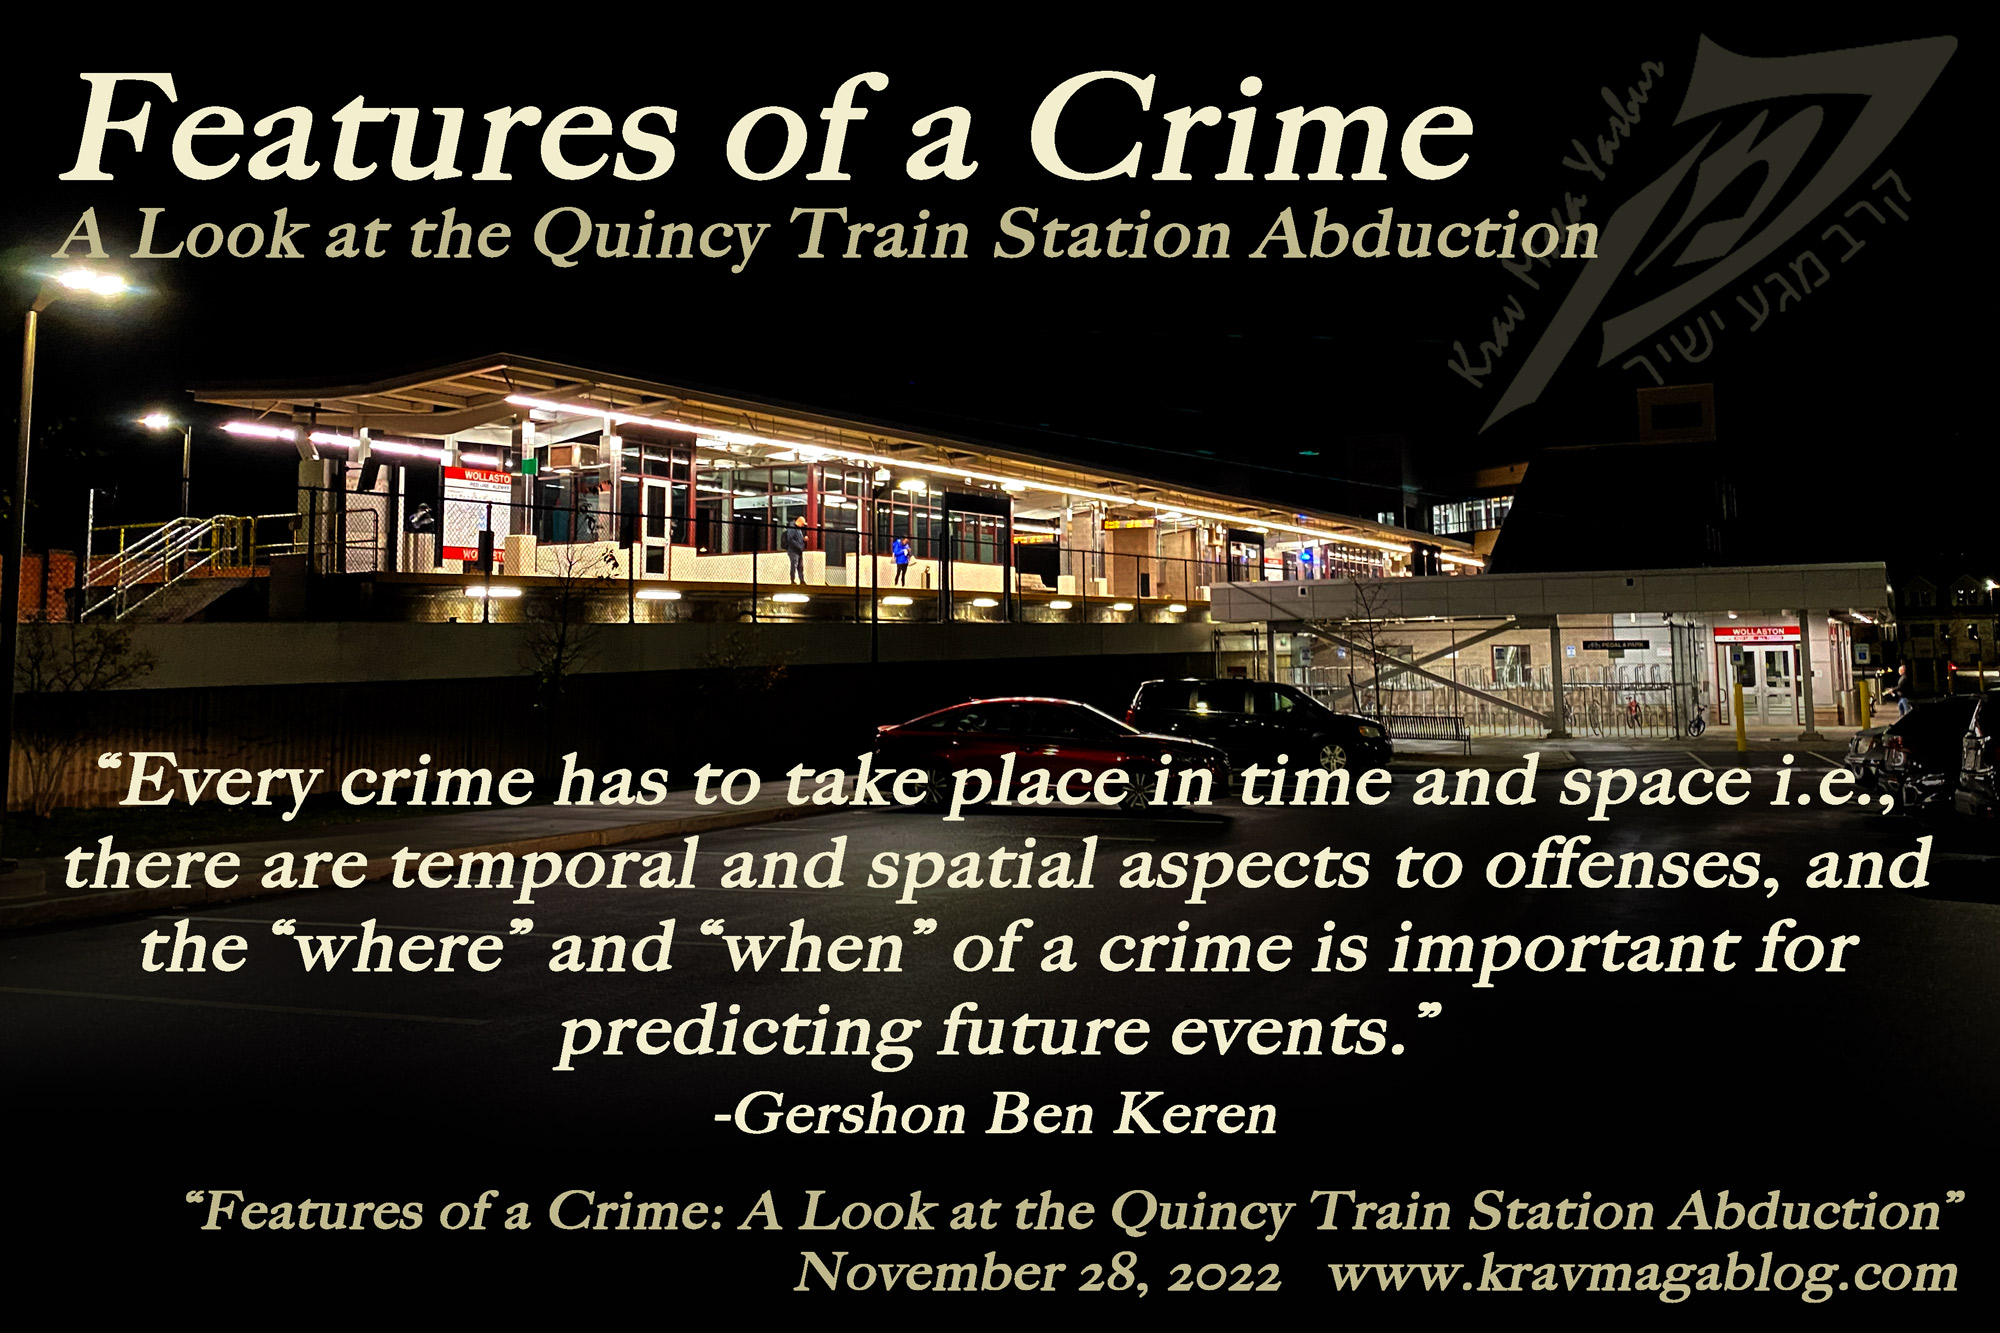 Blog About Features Of A Crime - The Quincy Train Station Abduction